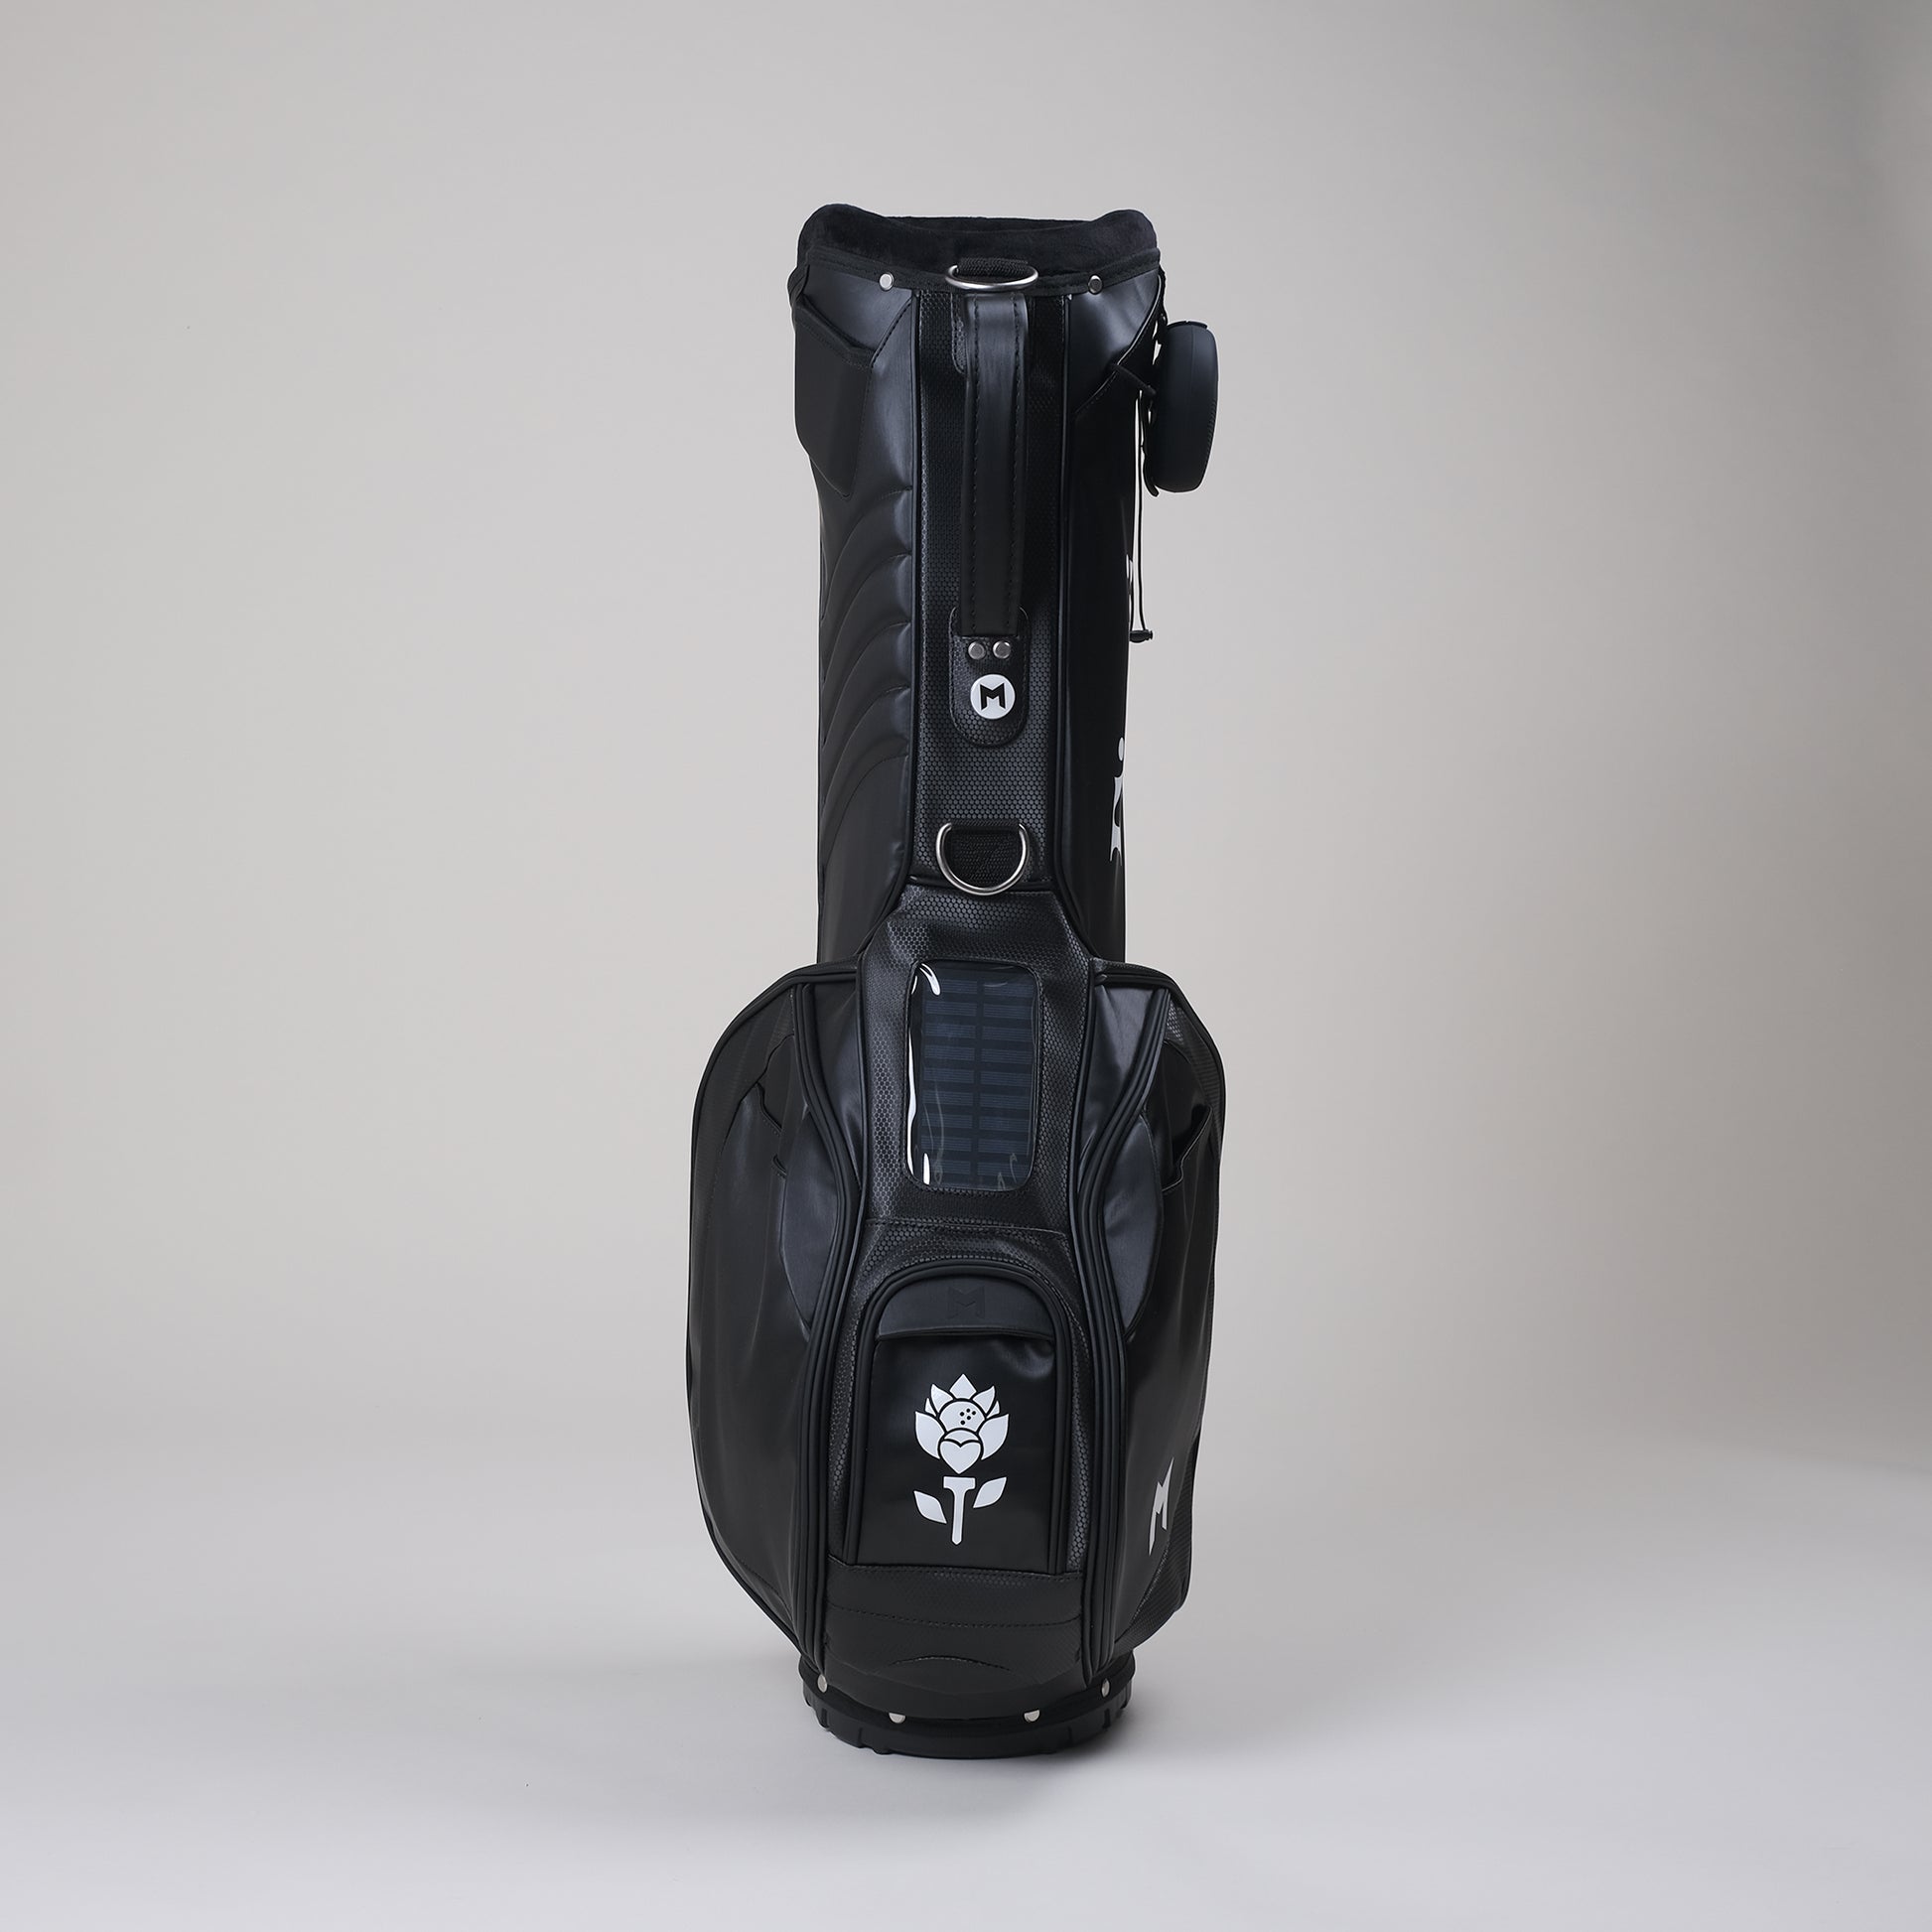 Black MNML GOLF bag with Fiori logo hand painted on magnetic ball pocket displayed. 